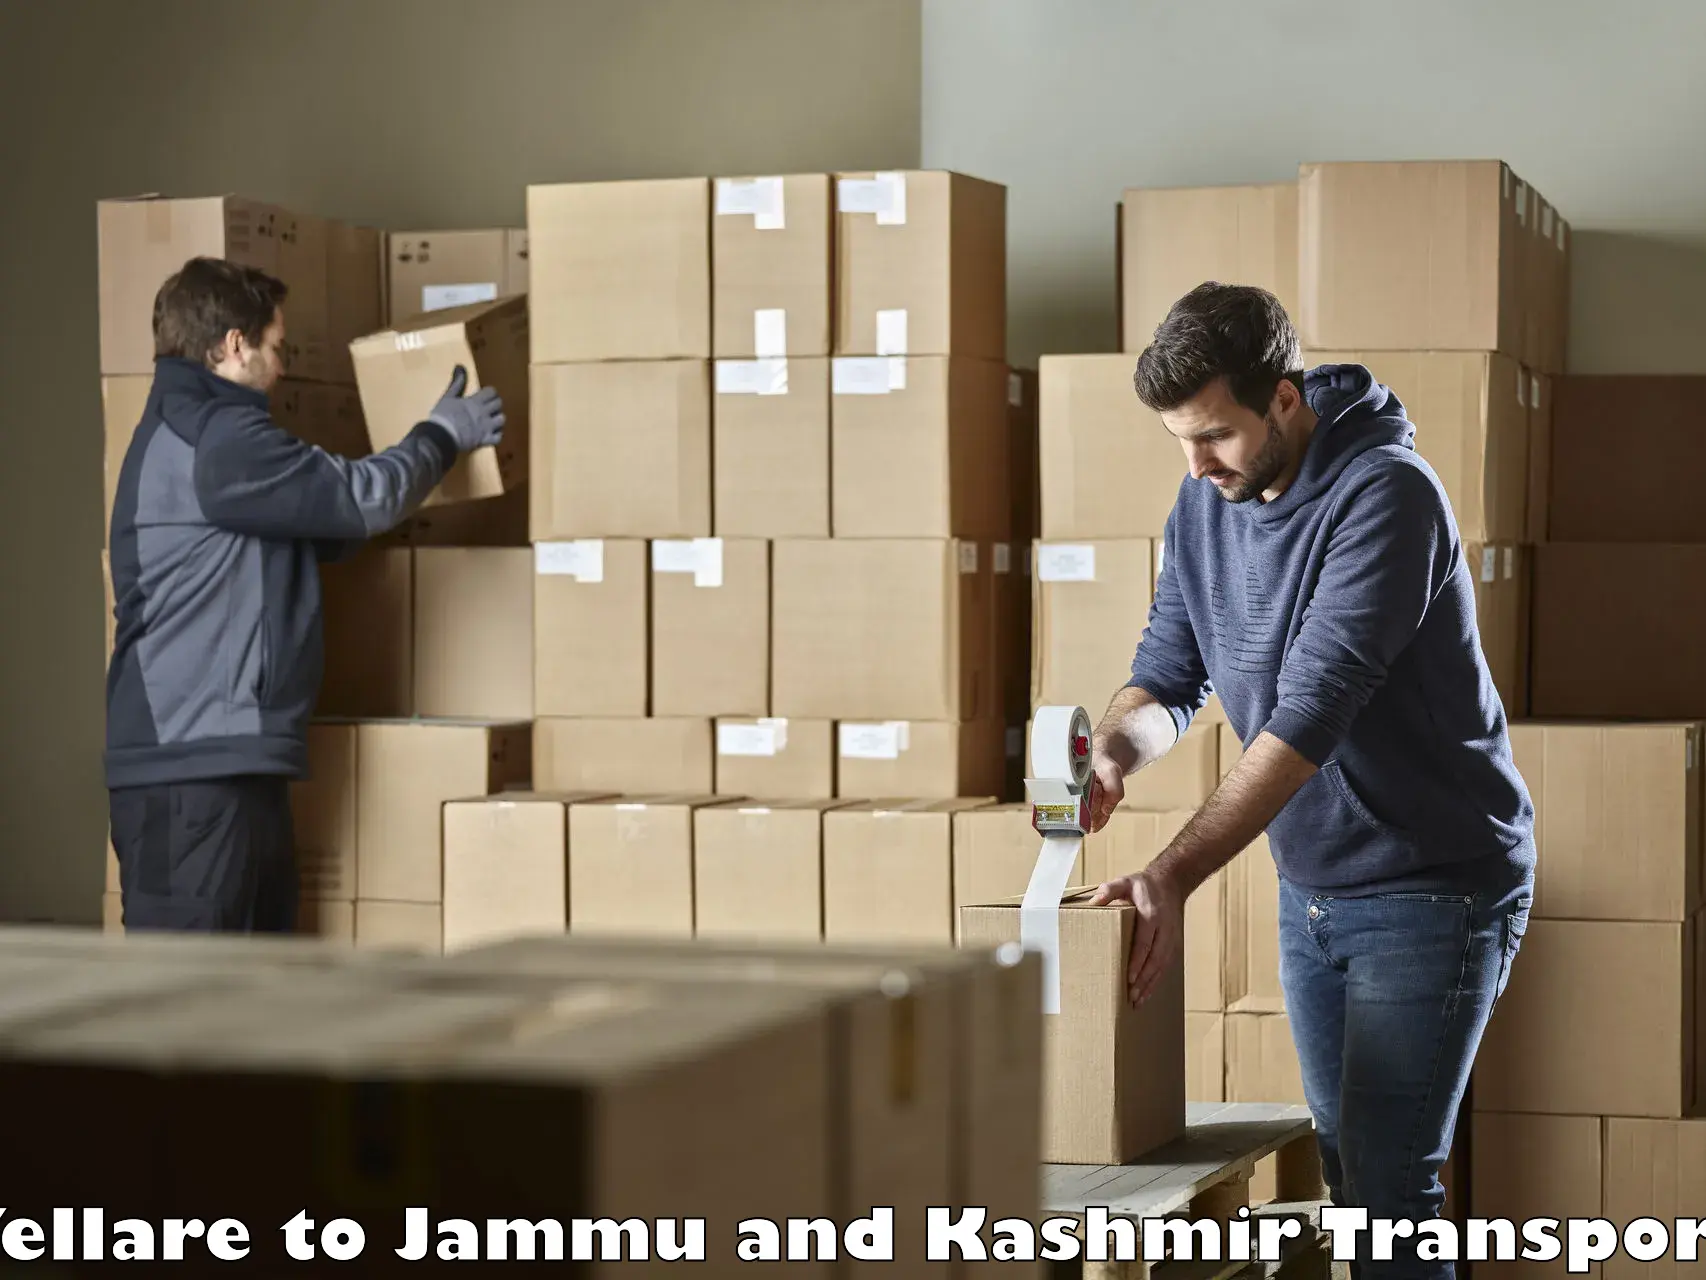 Daily parcel service transport Yellare to Jammu and Kashmir